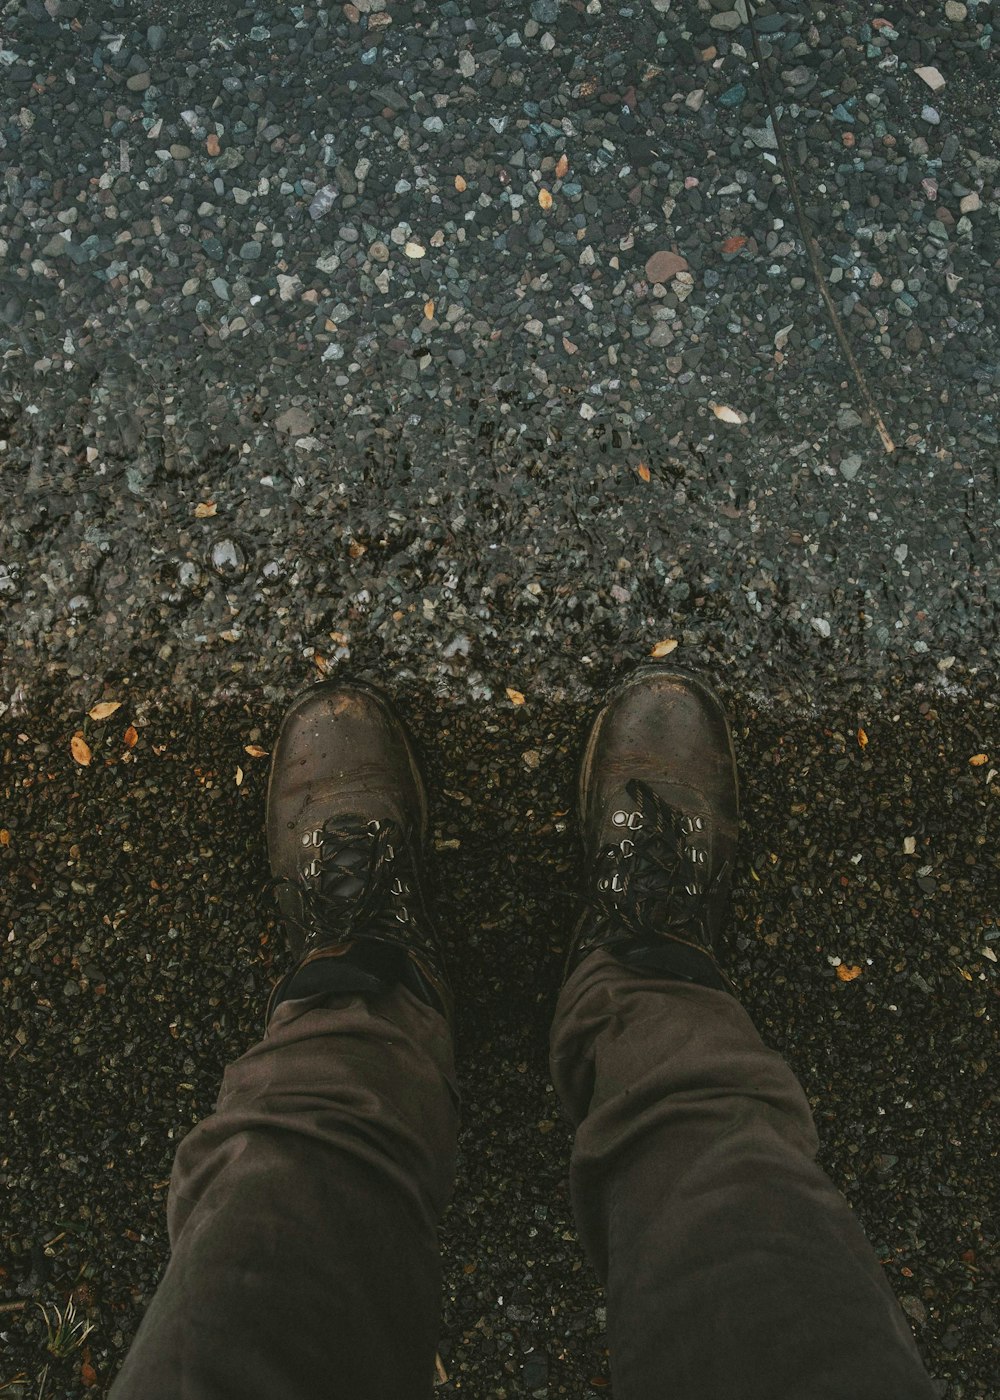 person wearing black leather boots standing on ground